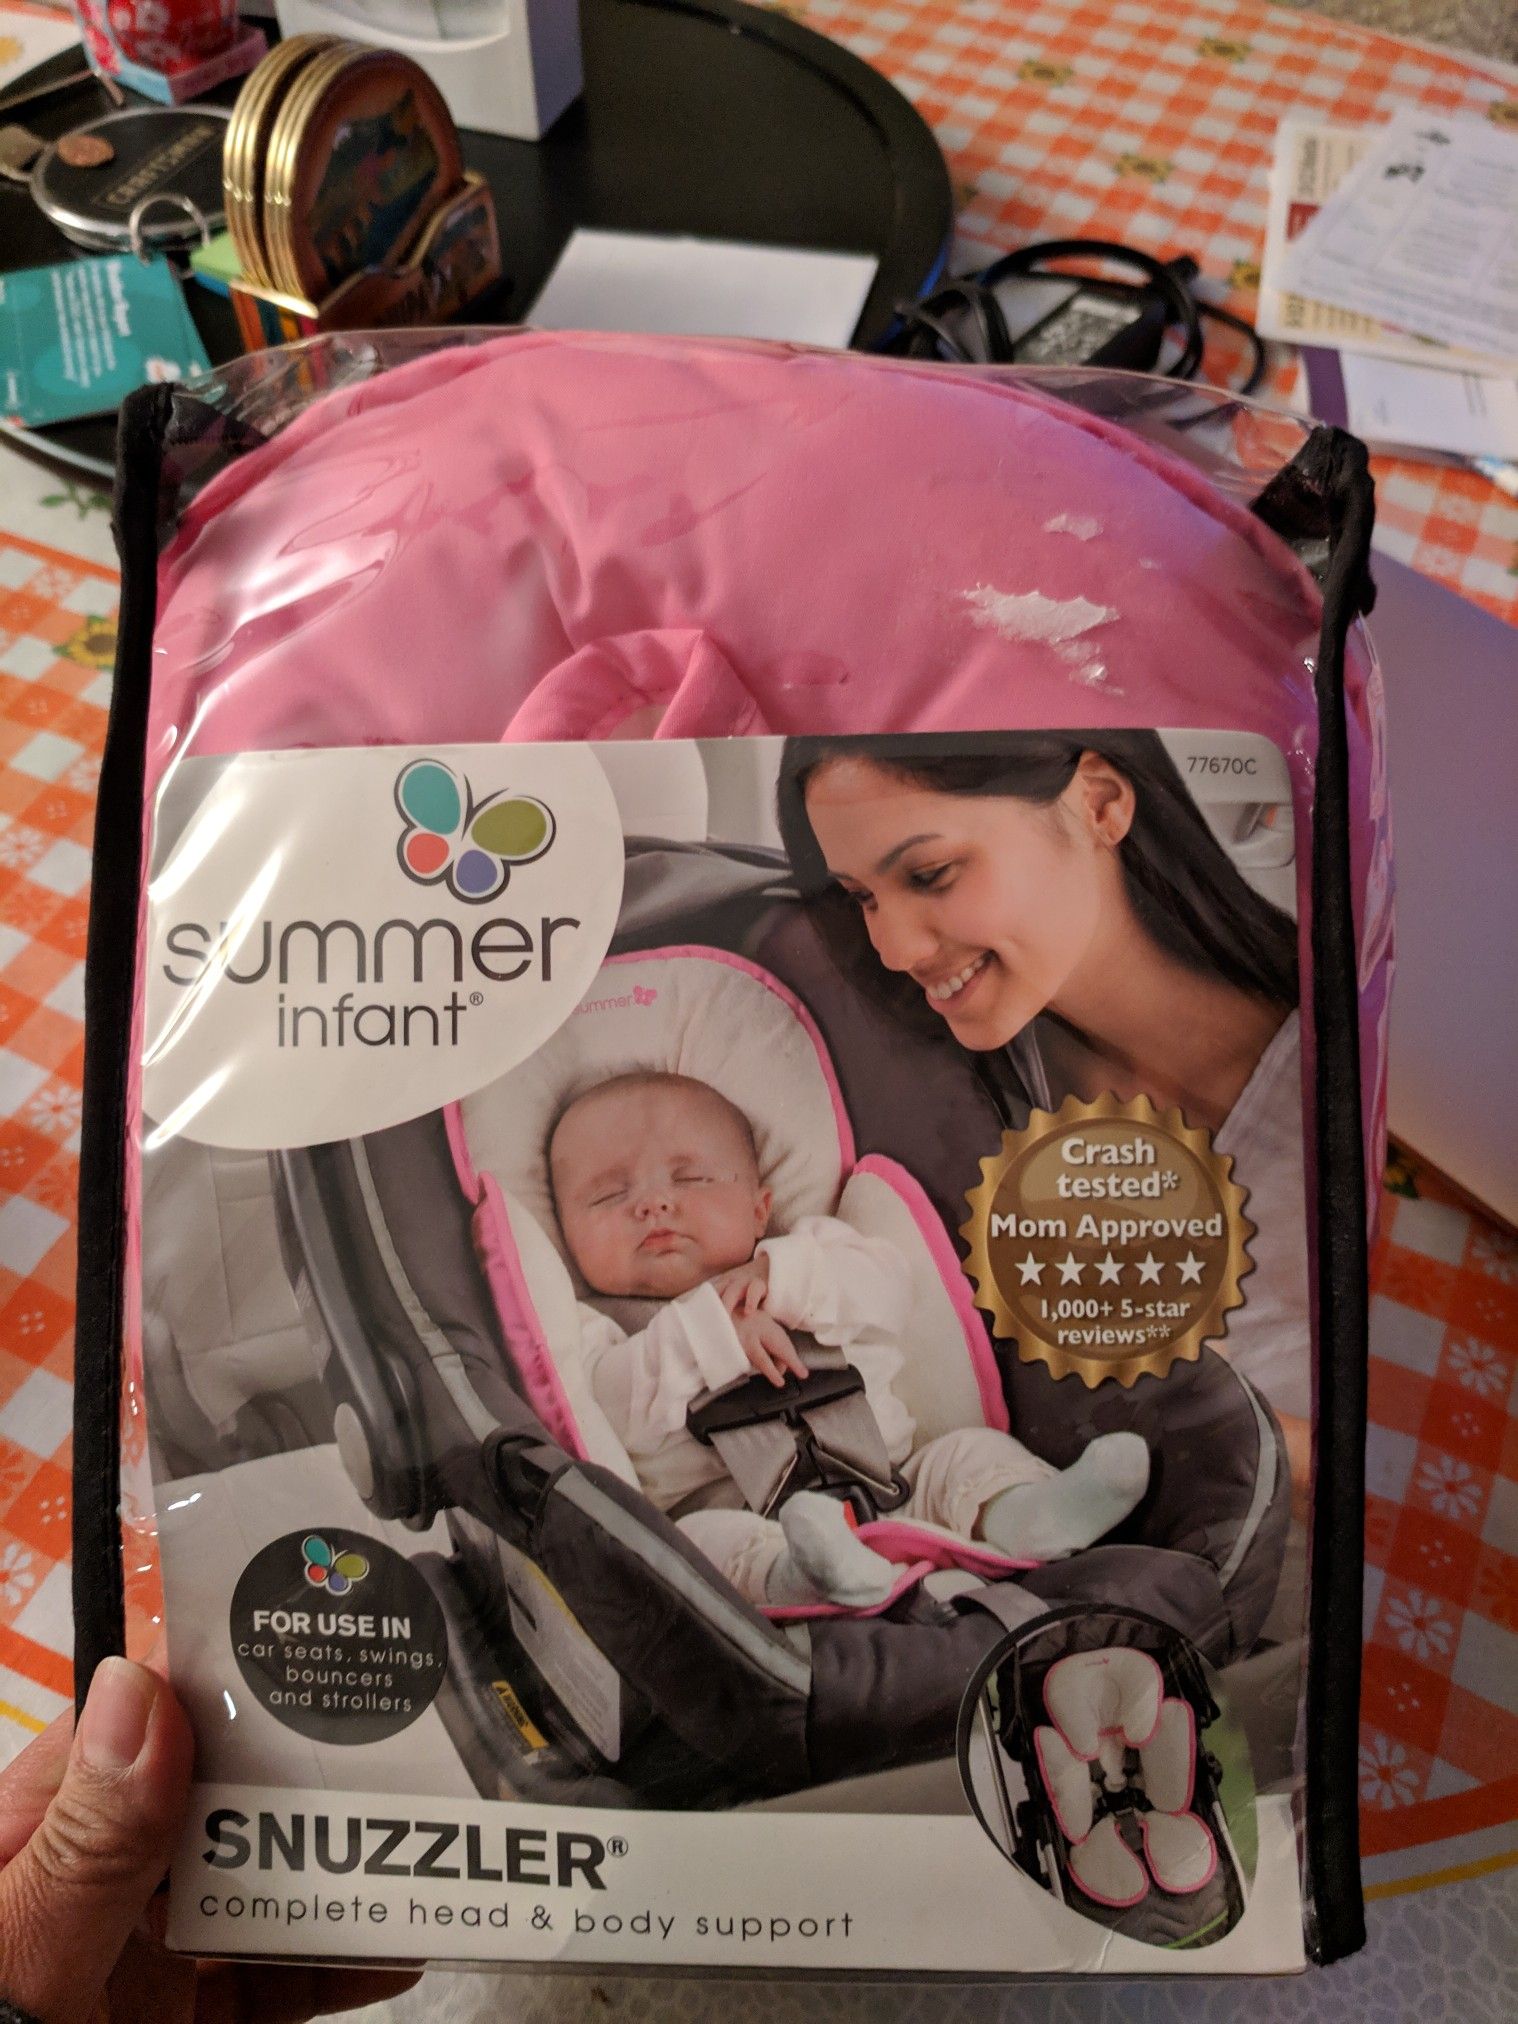 Summer infant Snuzzler for car seat, swings and strollers